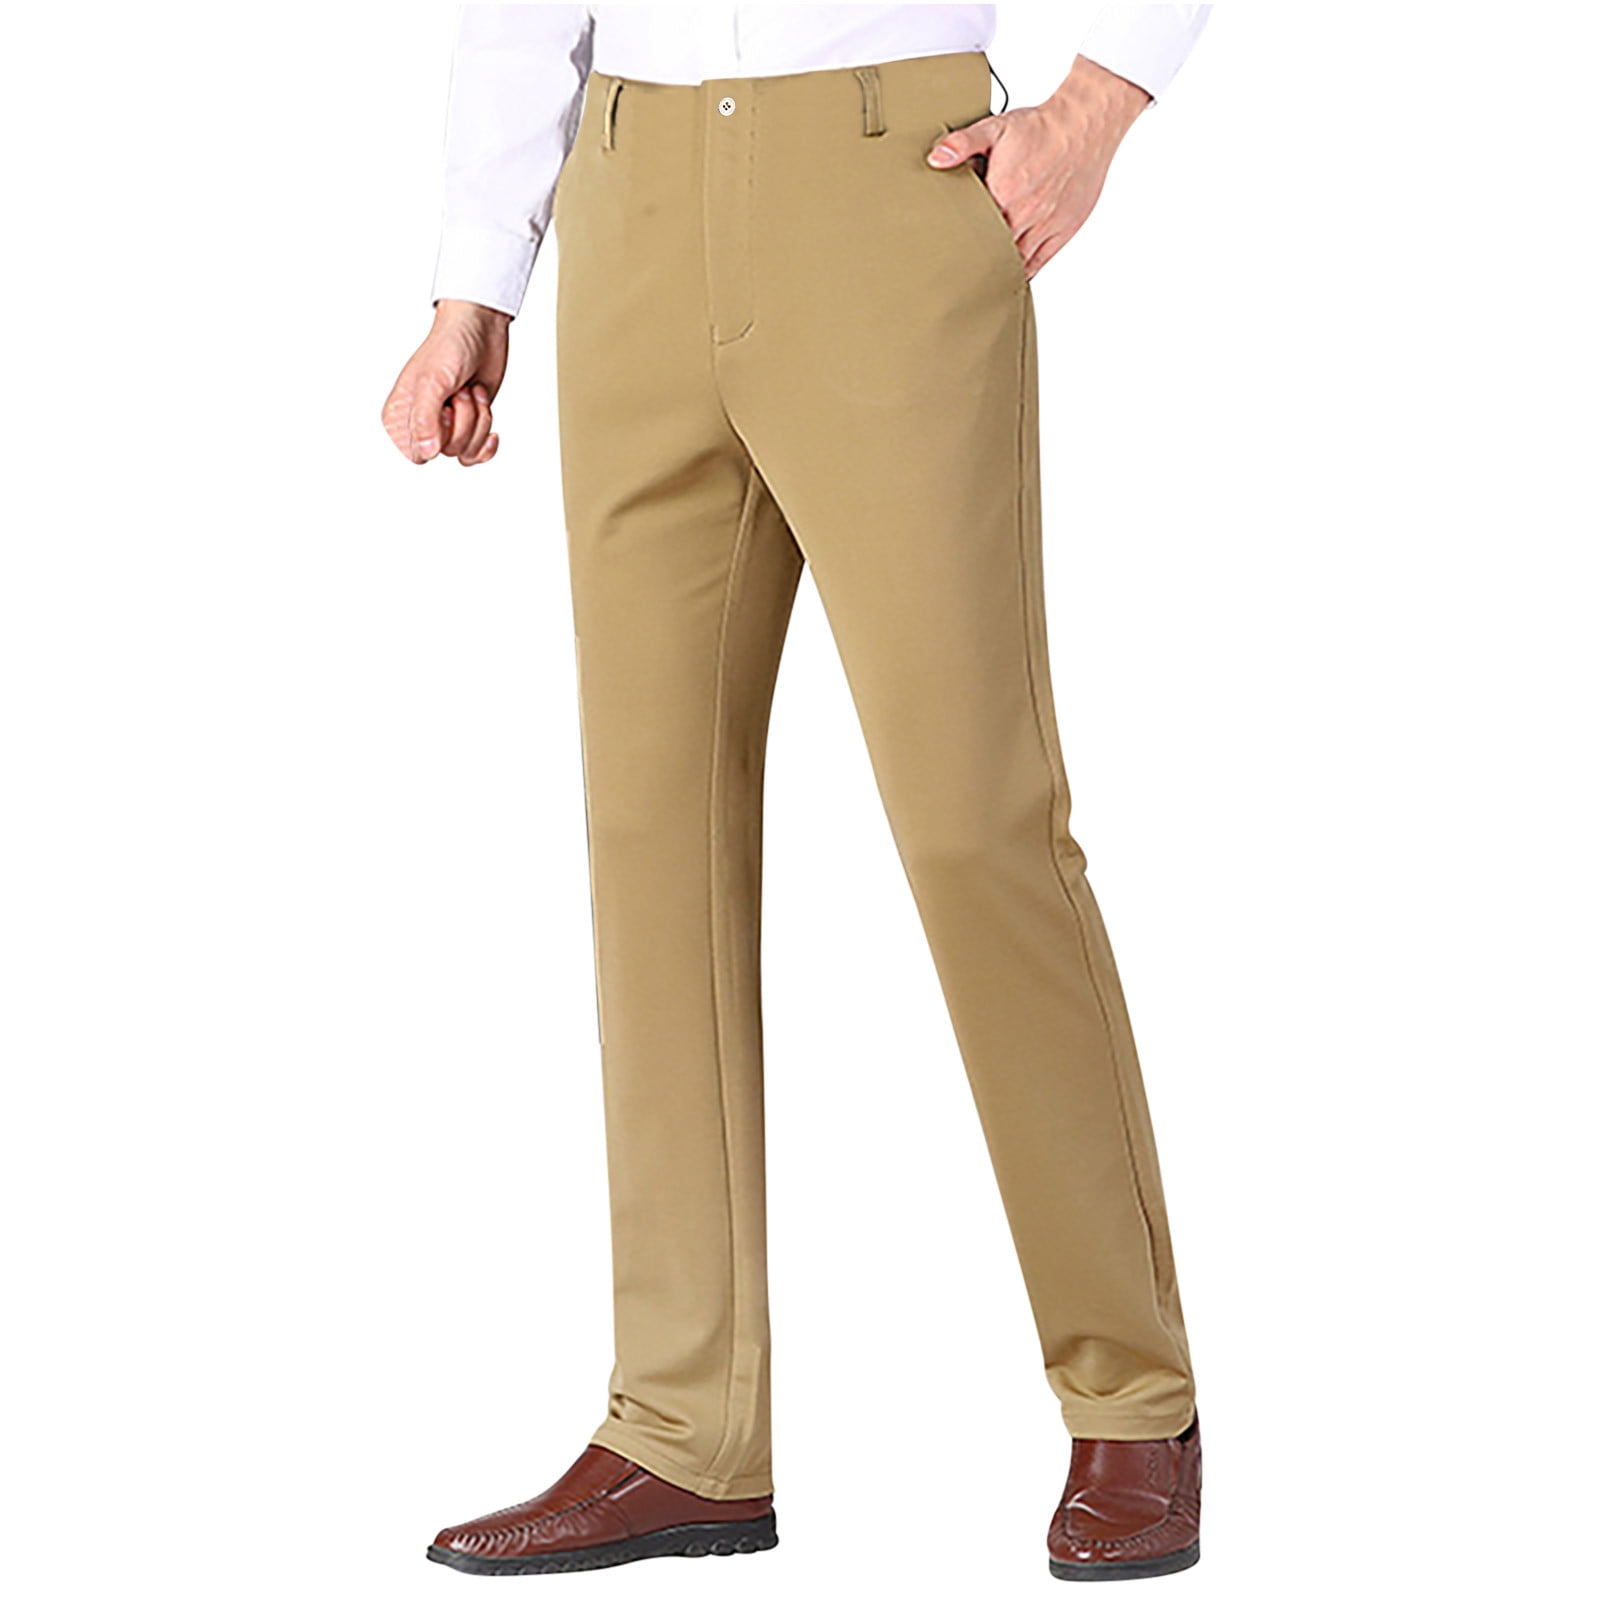 Penkiiy Dress Pants for Men New Fashion Casual Daily Holiday Formal ...